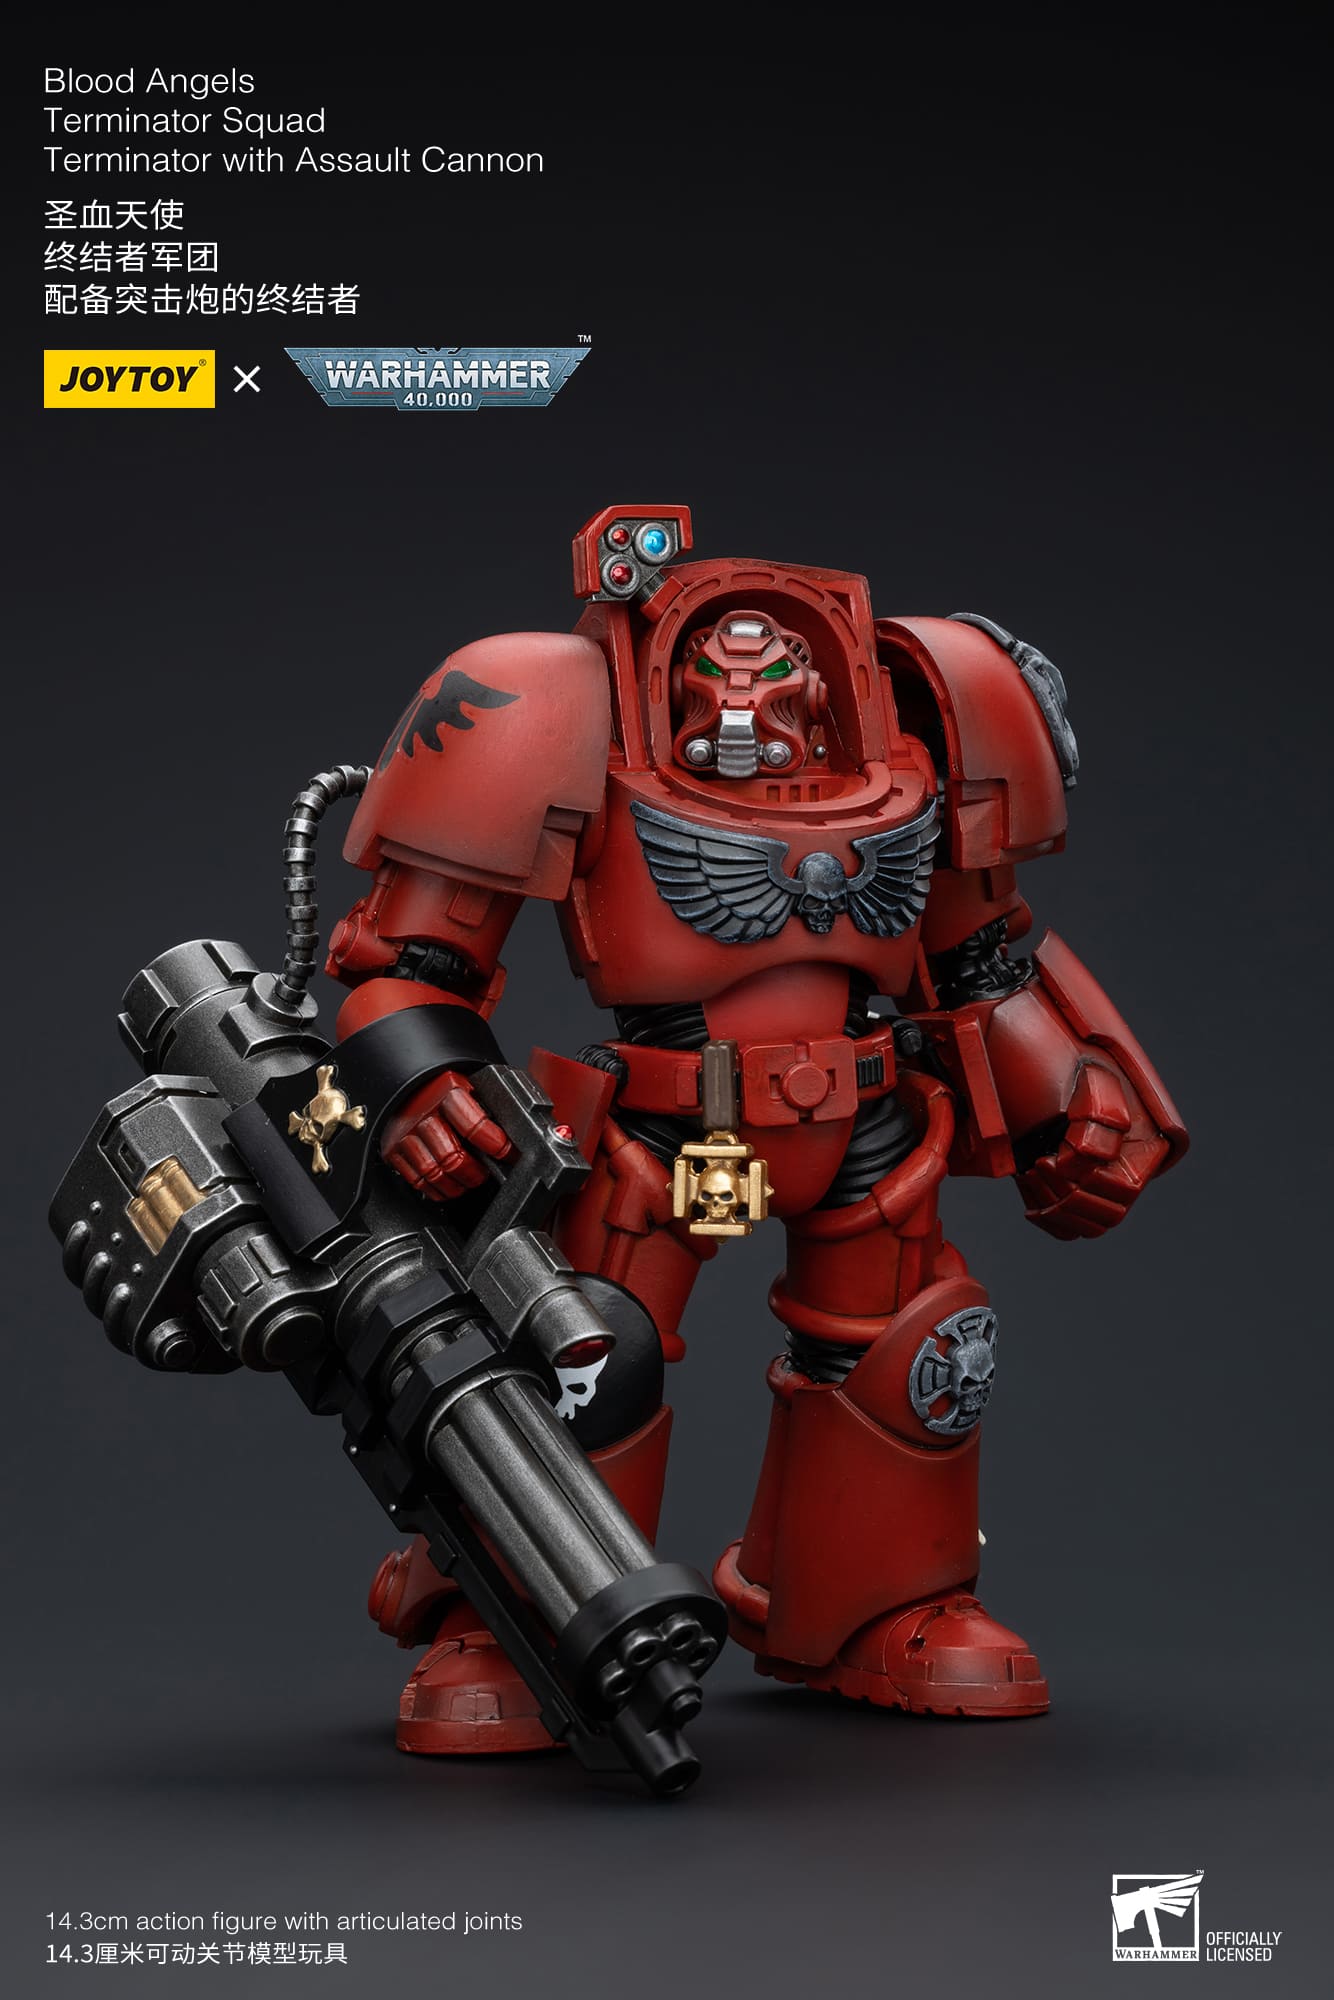 JoyToy WH40K Blood Angels Terminator Squad Terminator with Assault Cannon 2